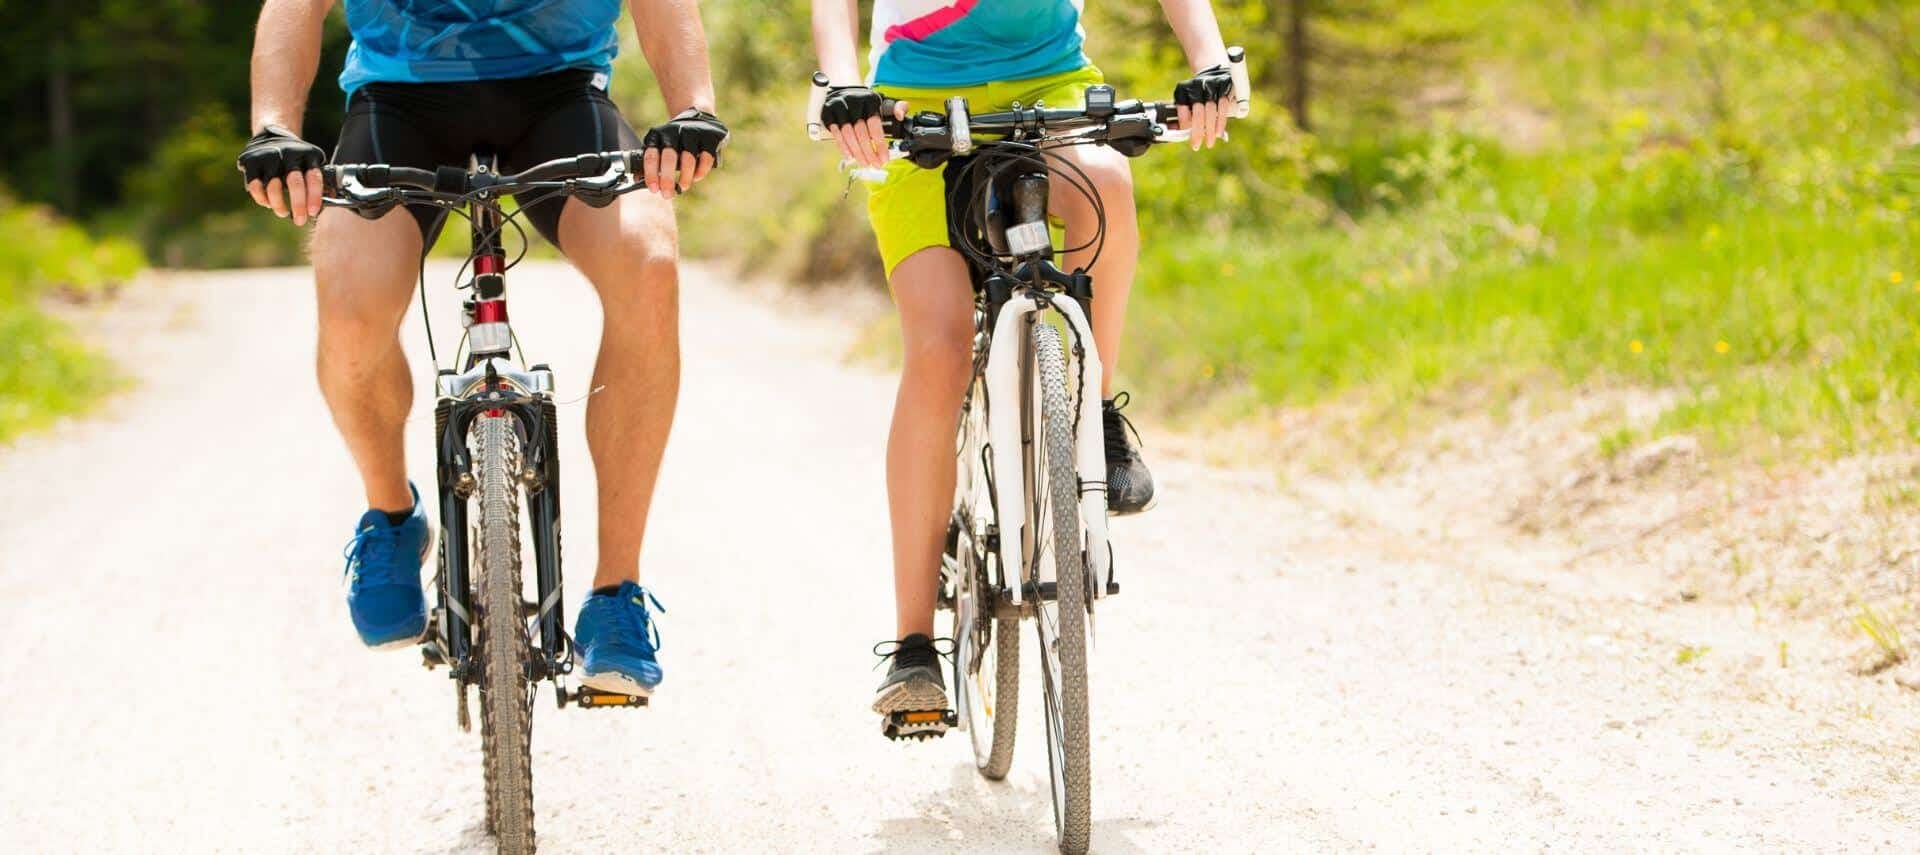 Two cyclists in shorts and tennis shoes riding the trail.